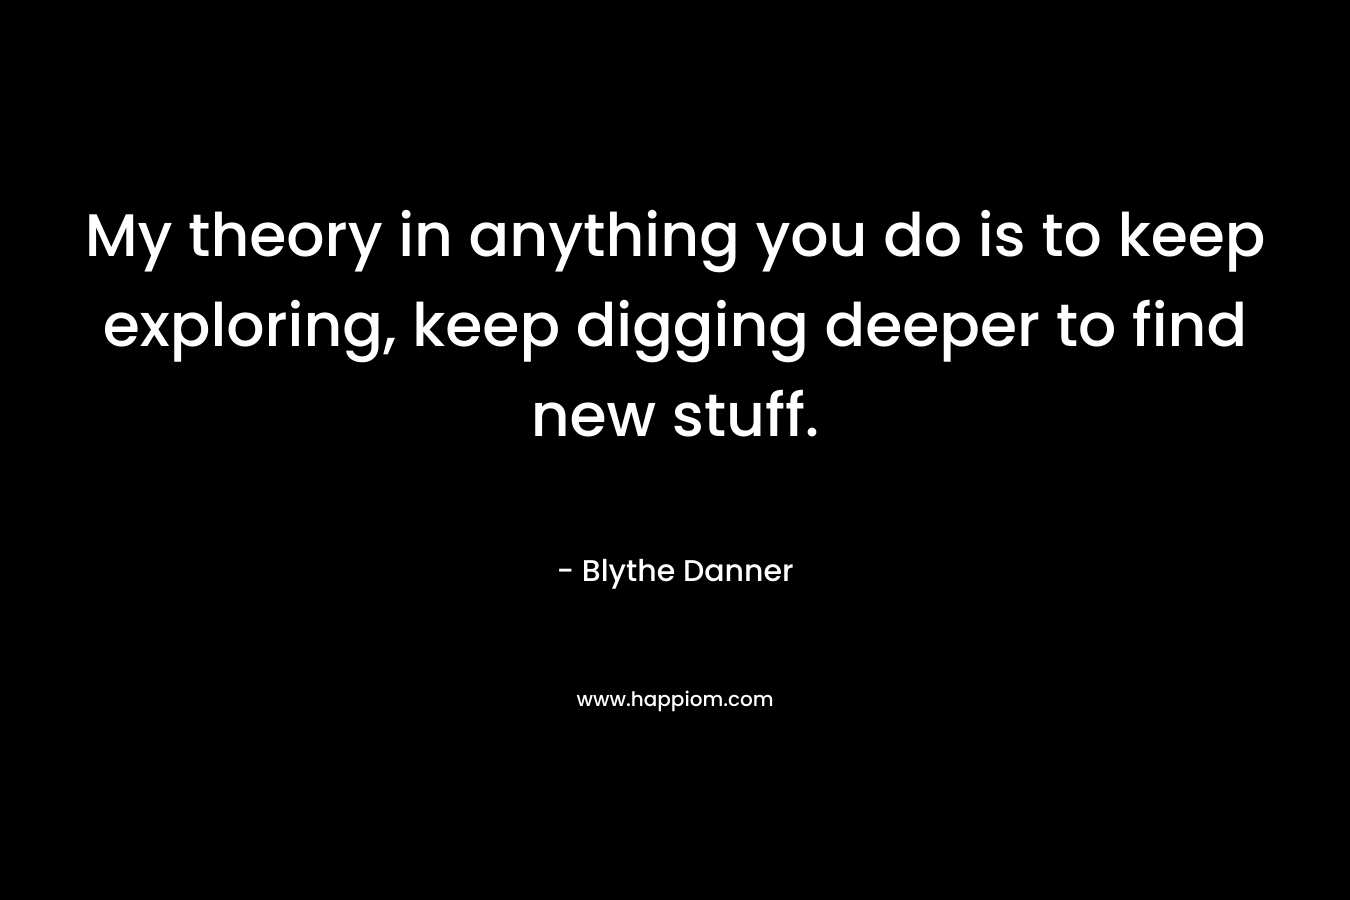 My theory in anything you do is to keep exploring, keep digging deeper to find new stuff.